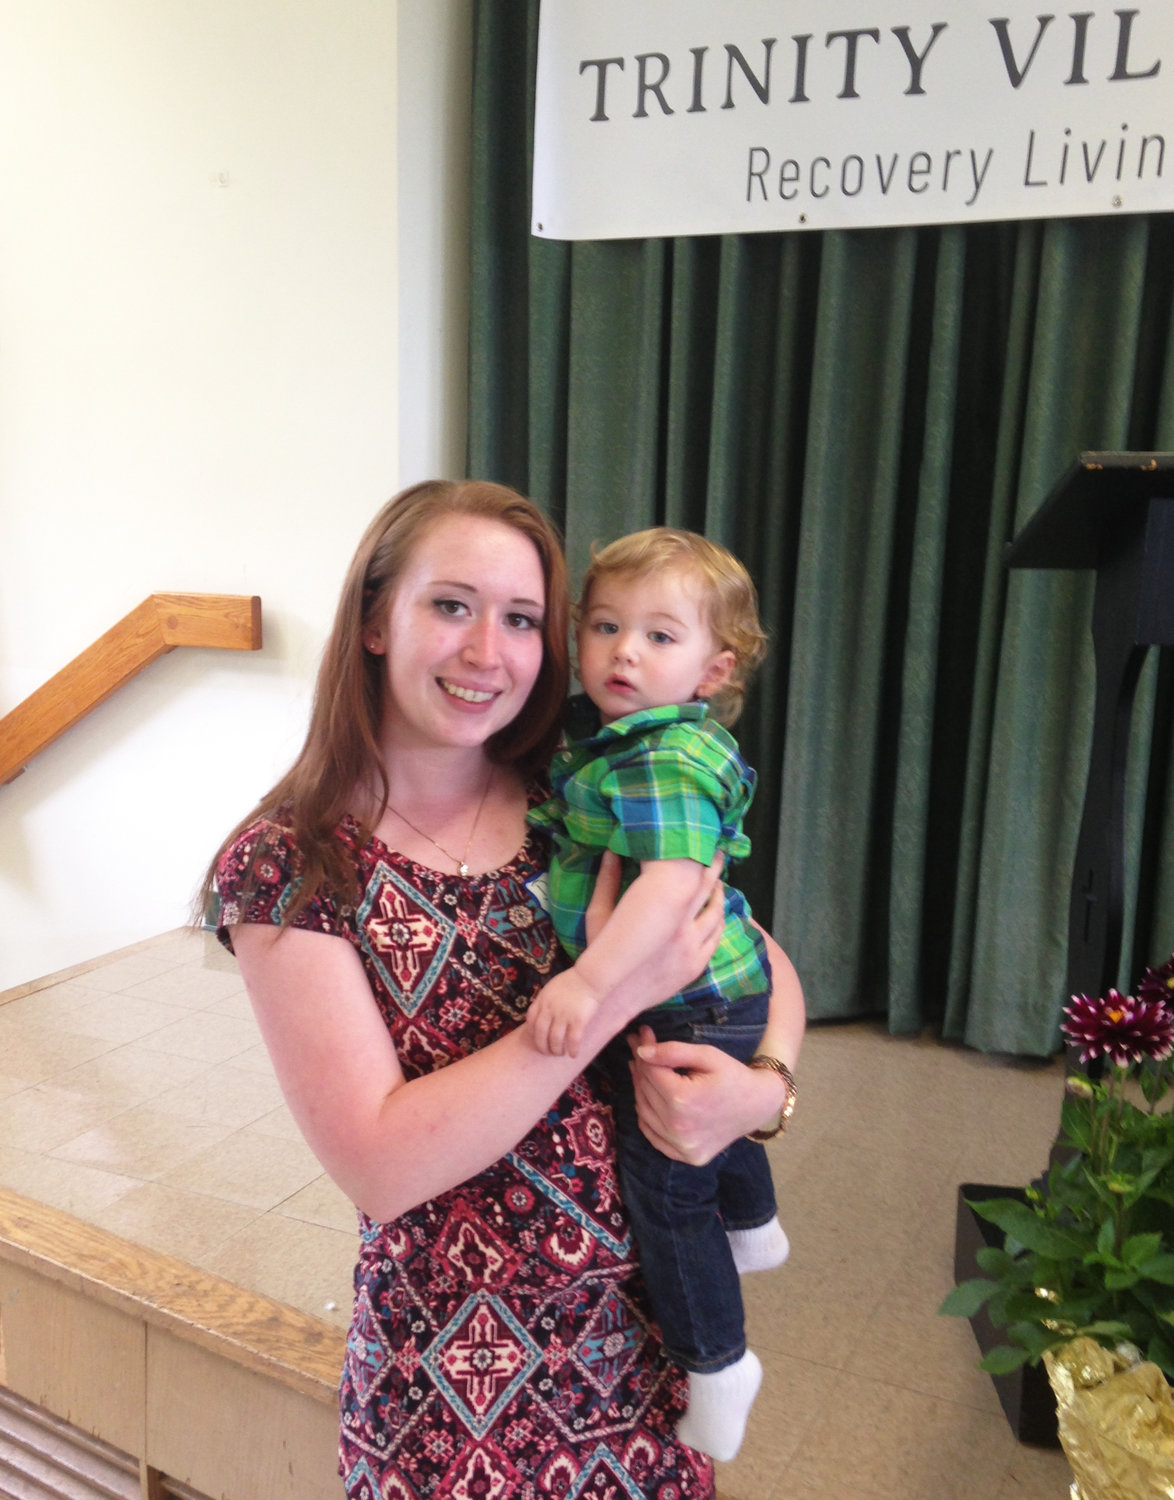 Danielle and her son at the celebration of the opening of The Blessing Way in Portsmouth.